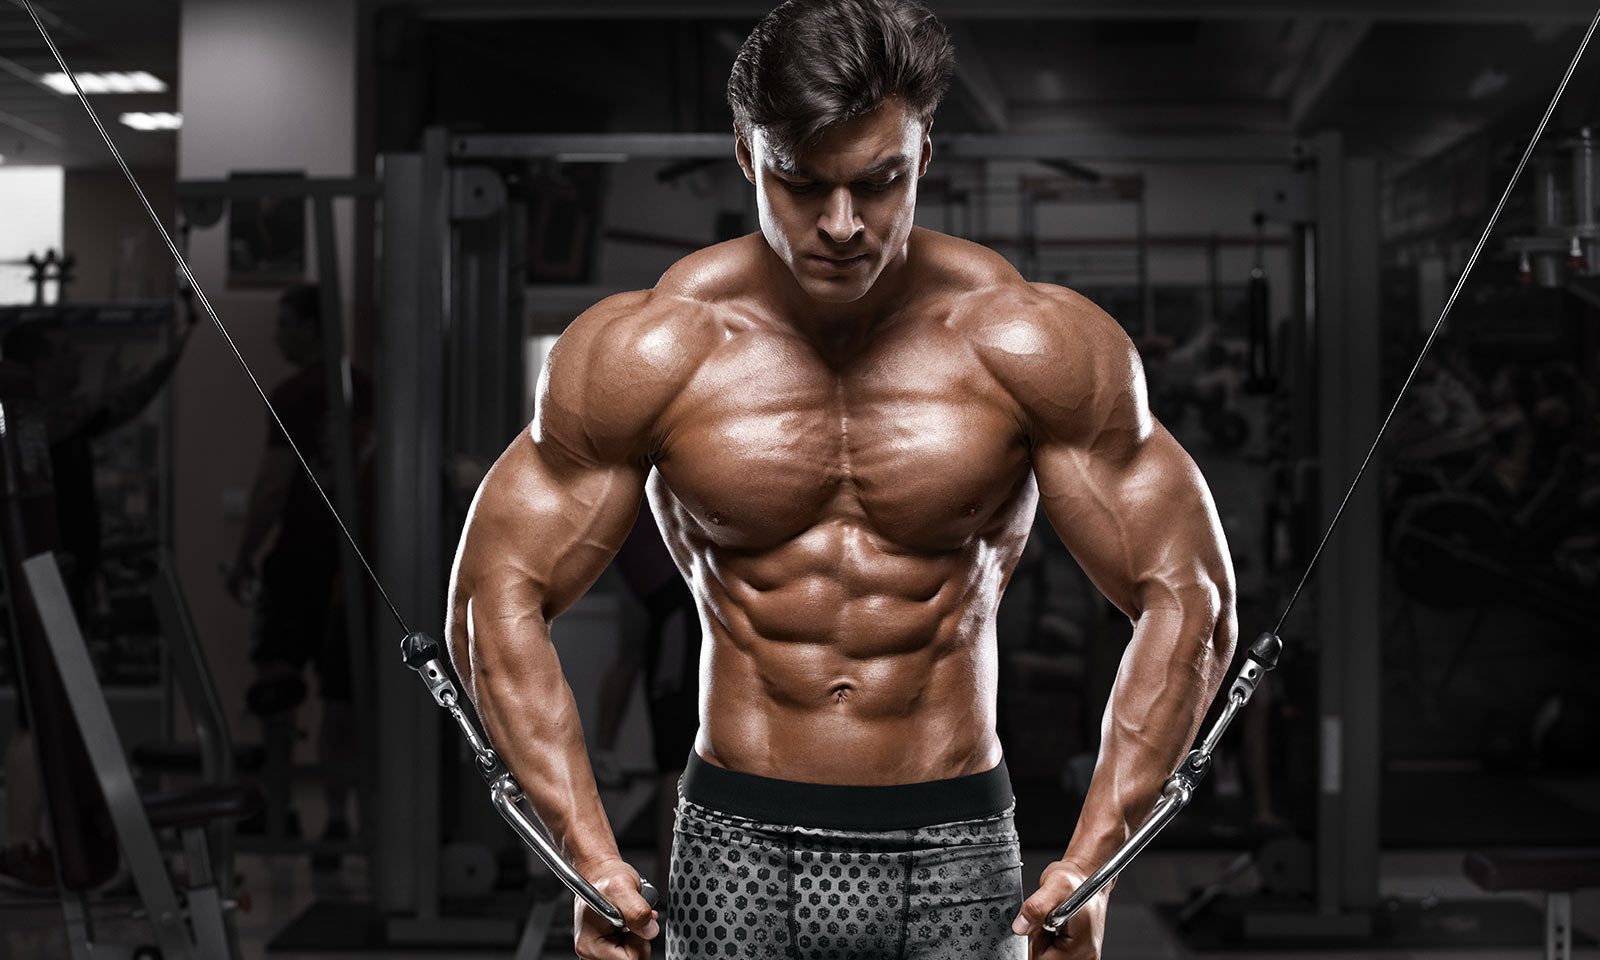 Your Ultimate Guide on Building Strength and Size